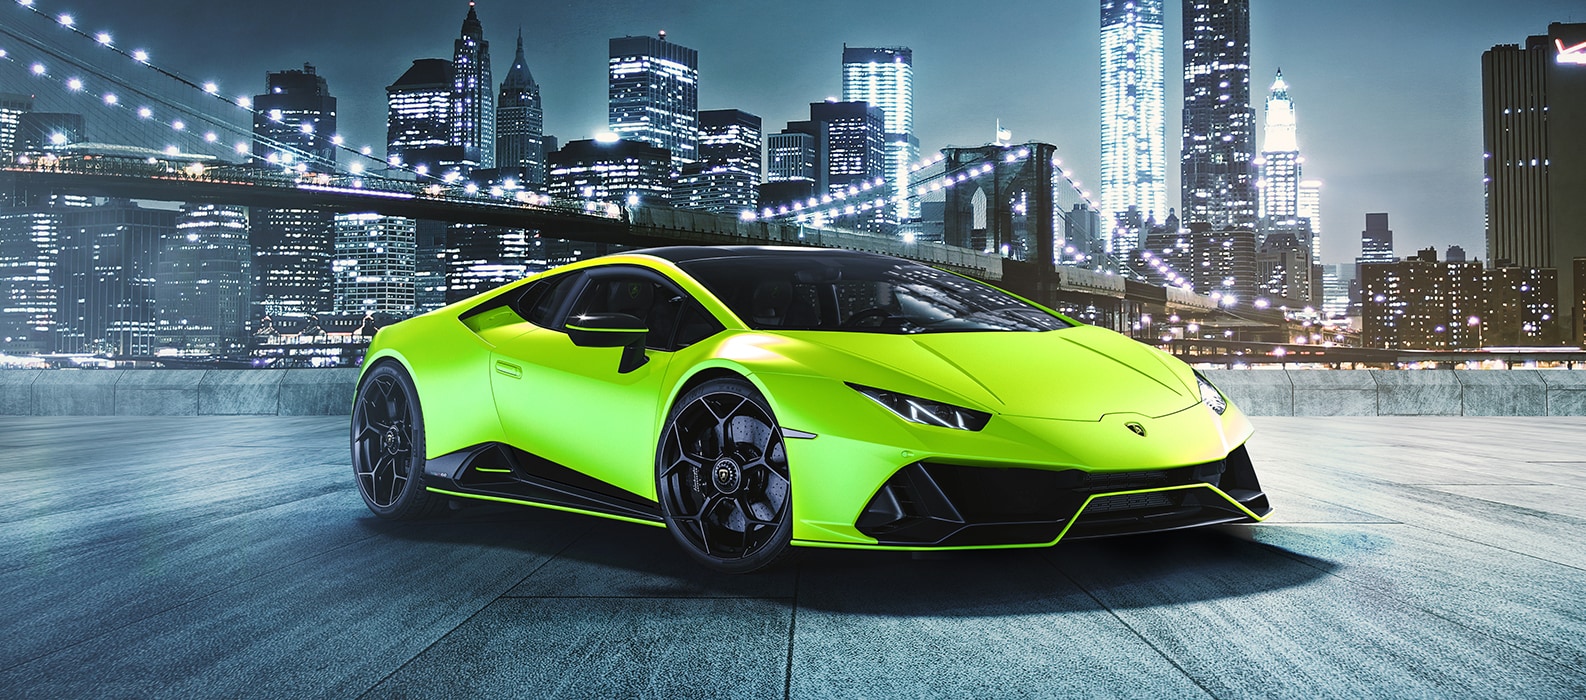 Huracán EVO Fluo Capsule: light up your road